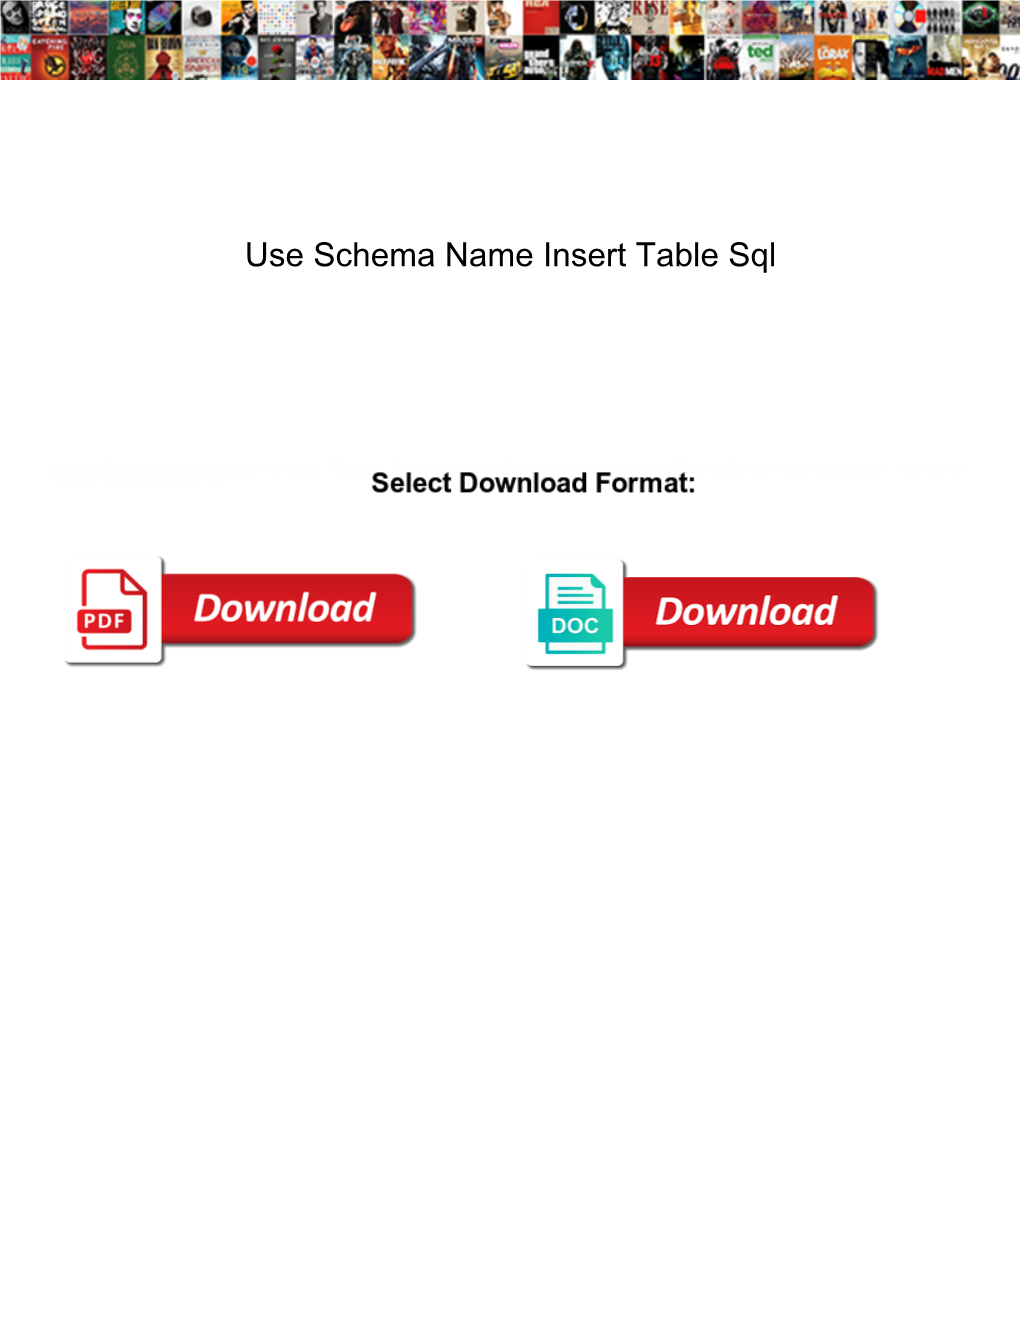 Use Schema Name Insert Table Sql